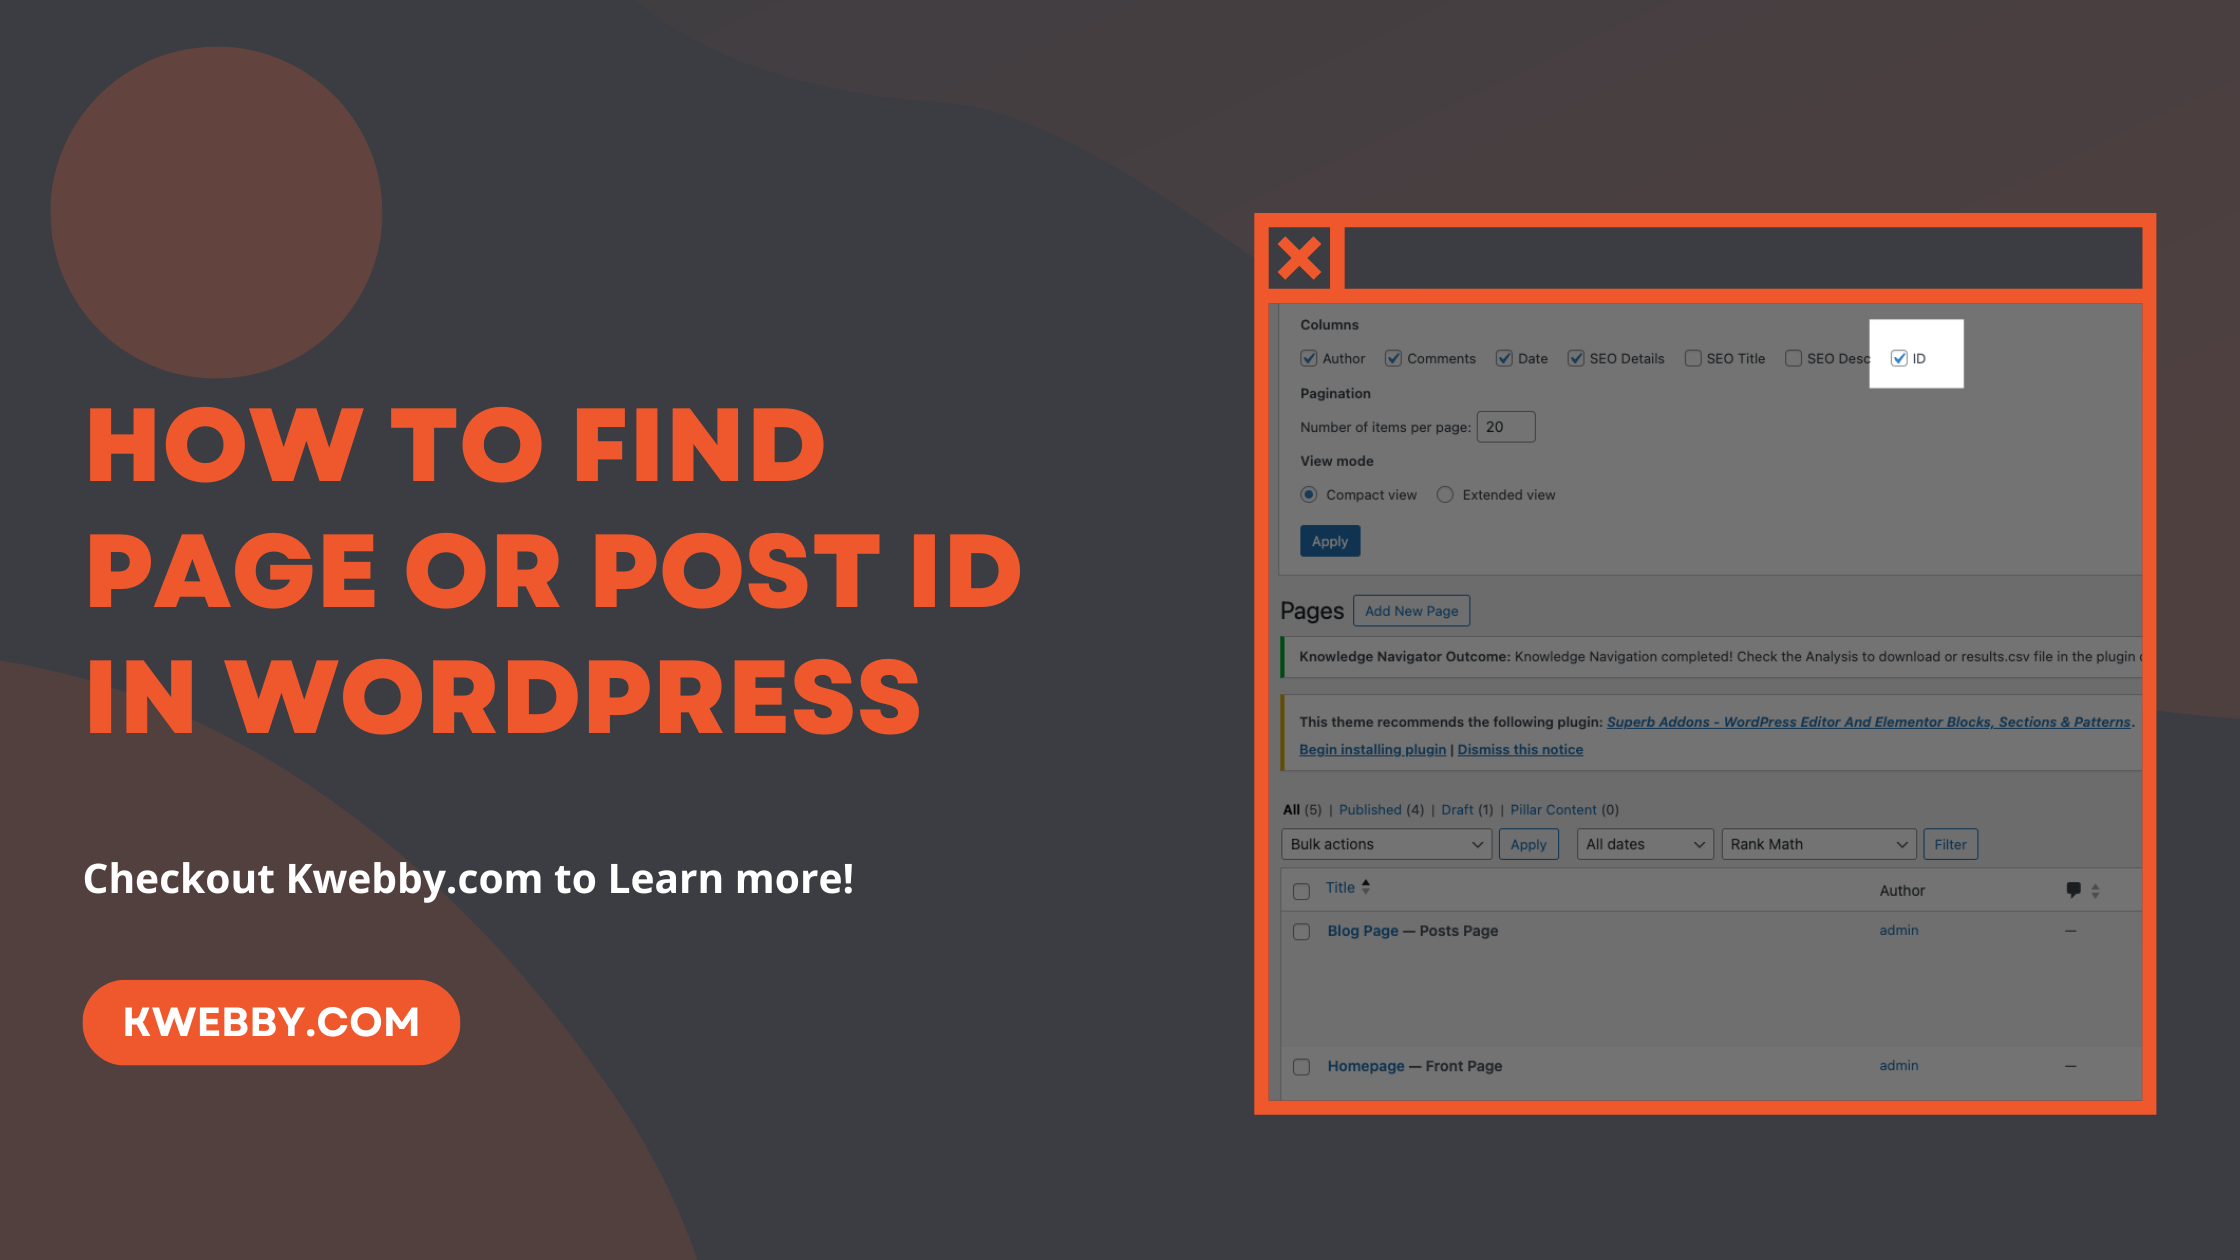 How to find Page or Post ID in WordPress